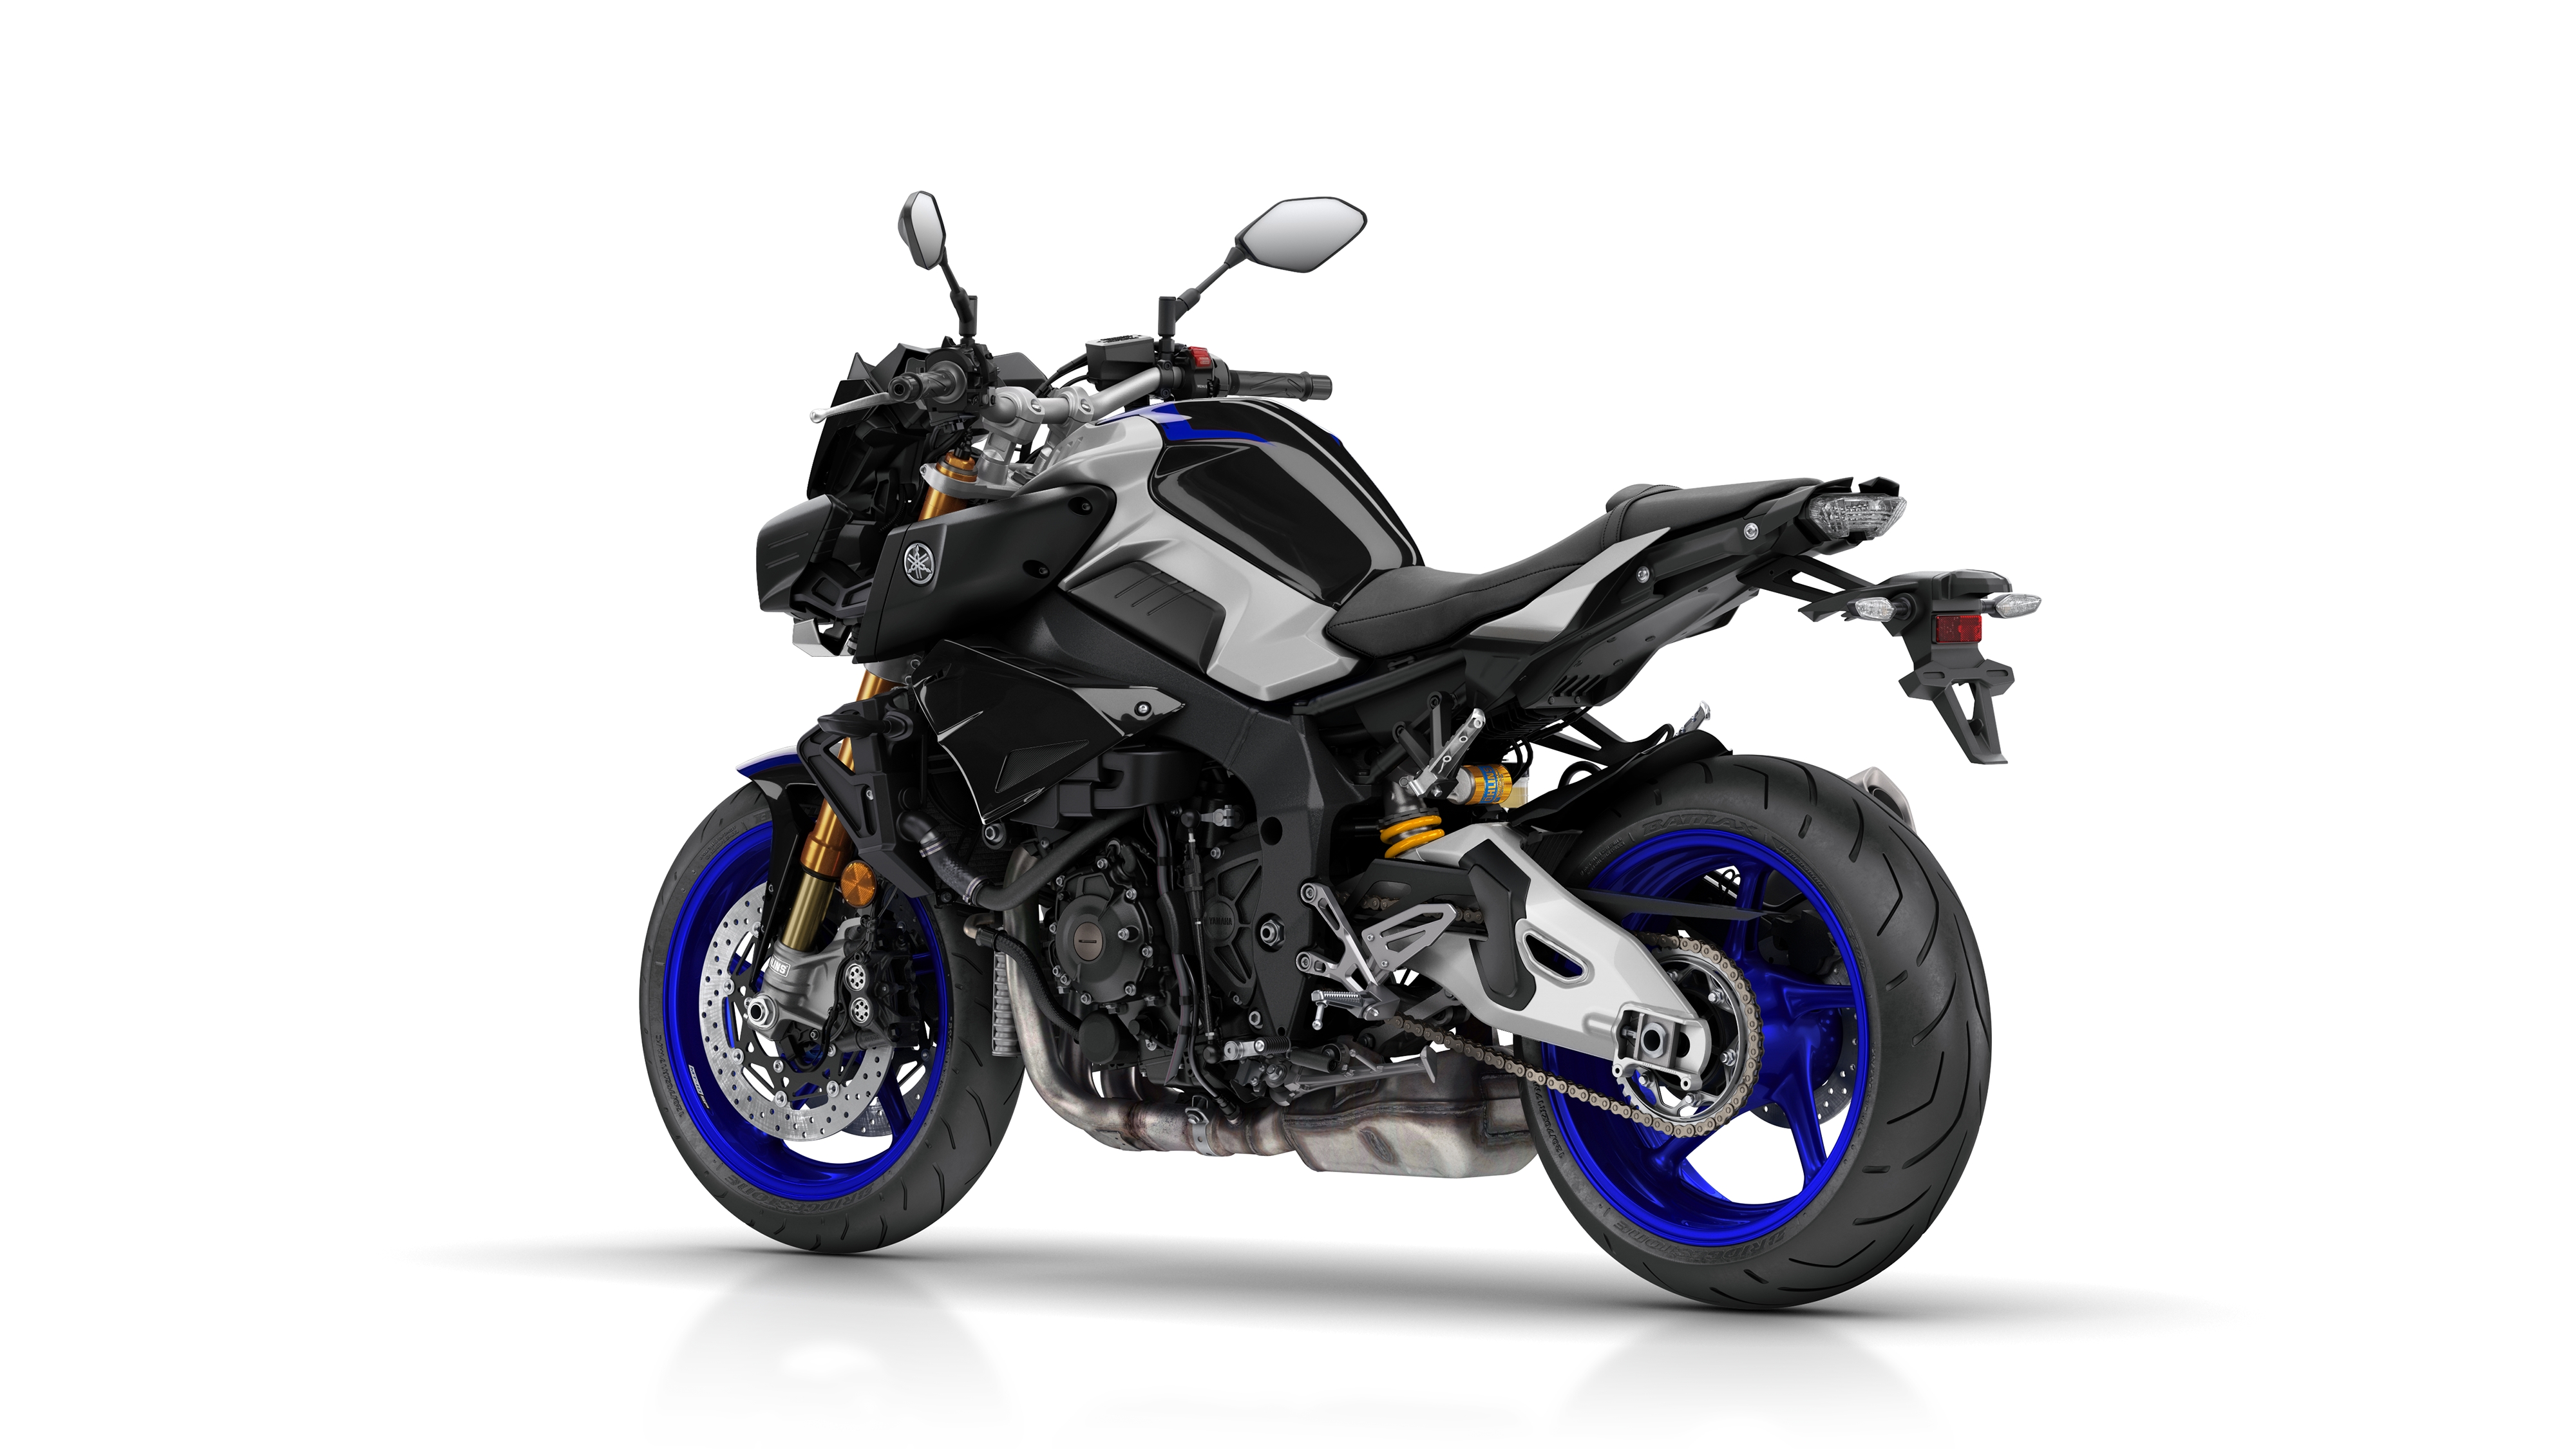 Yamaha reveals updated 2017 MT-10 and new MT-10 SP